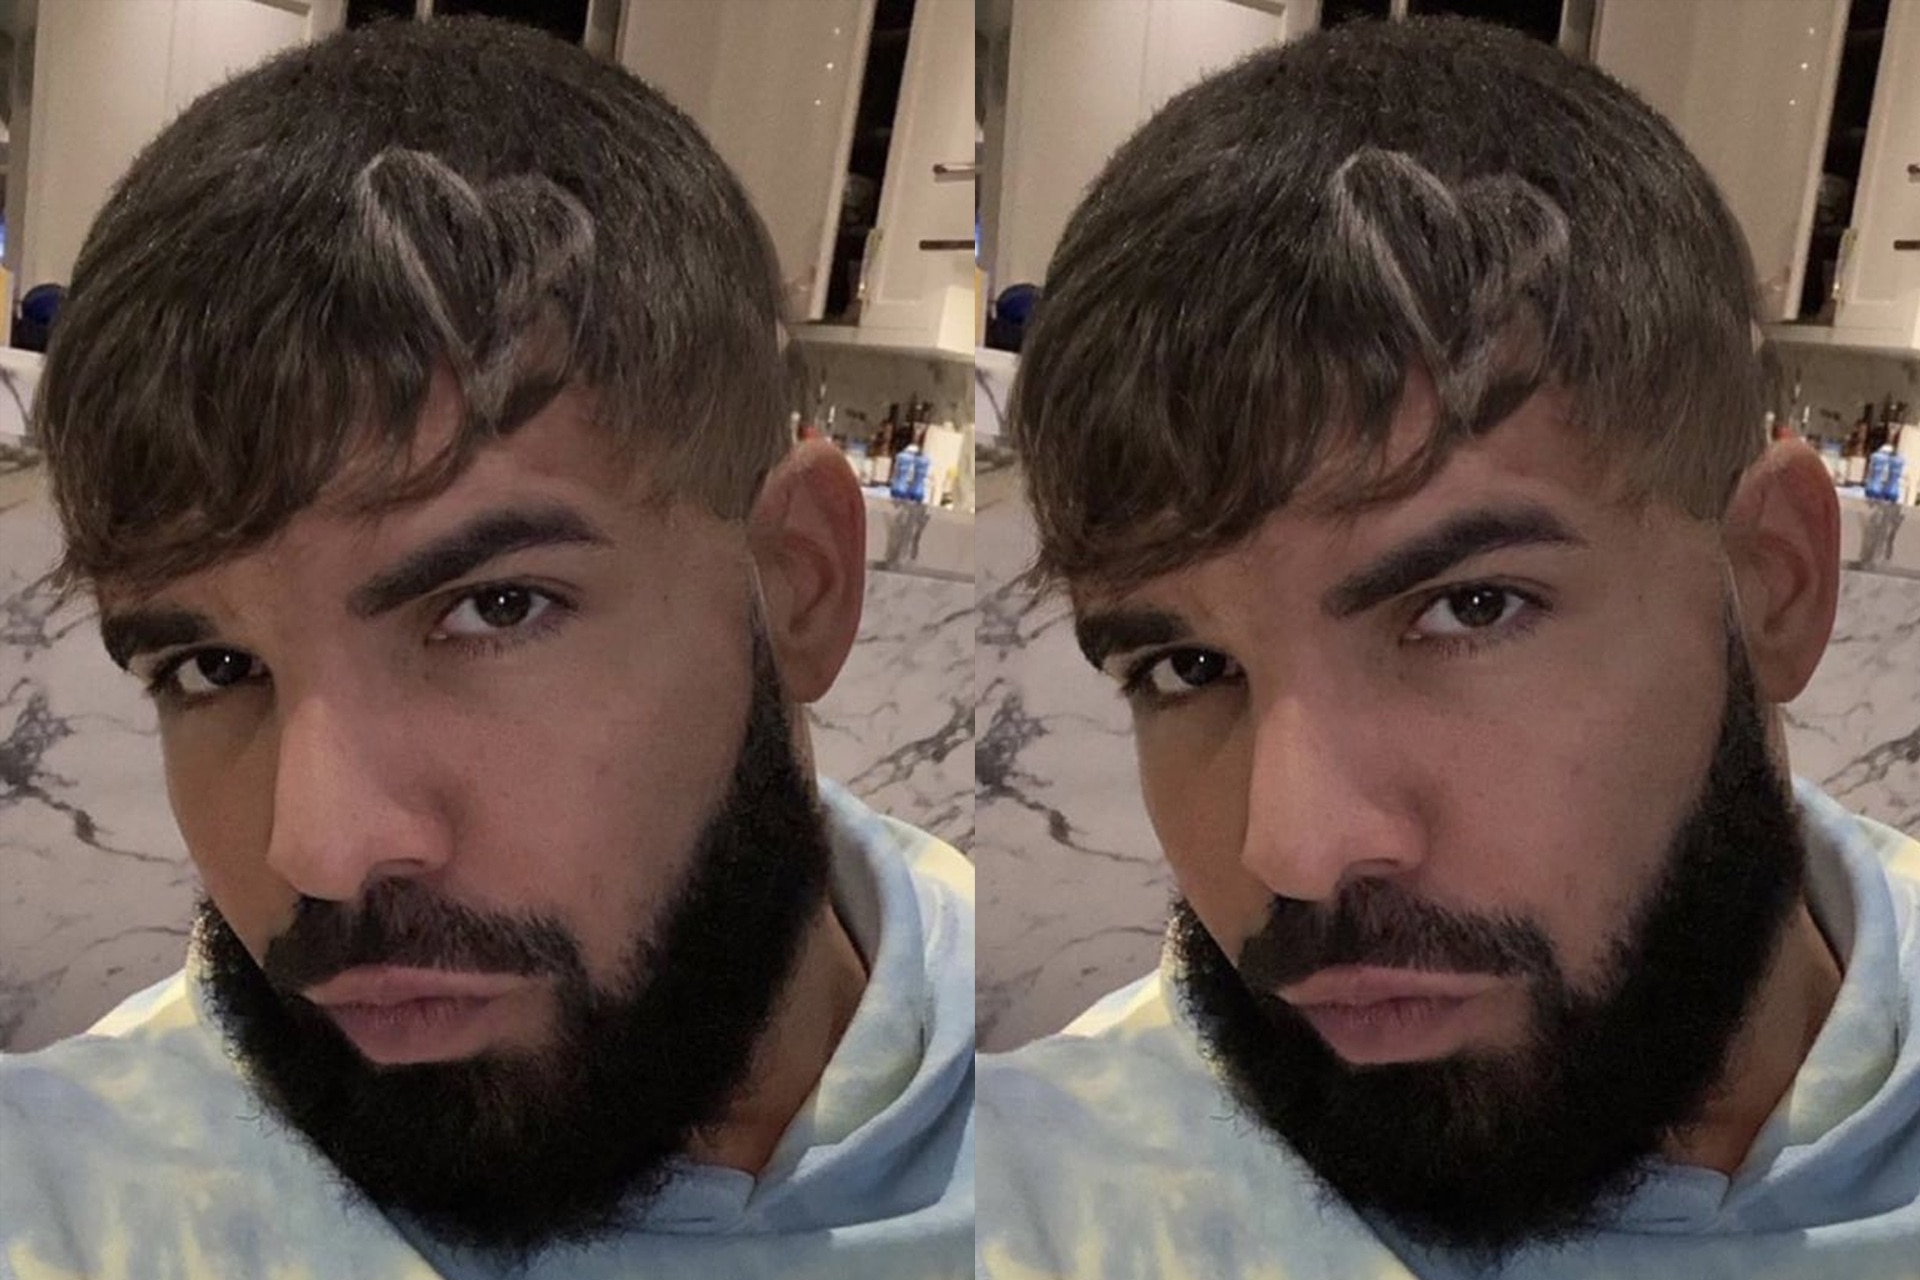 Drake Has Somehow Got Himself A Buzz Cut-Bowl Cut, And The Internet Has  Some Thoughts - GQ Australia